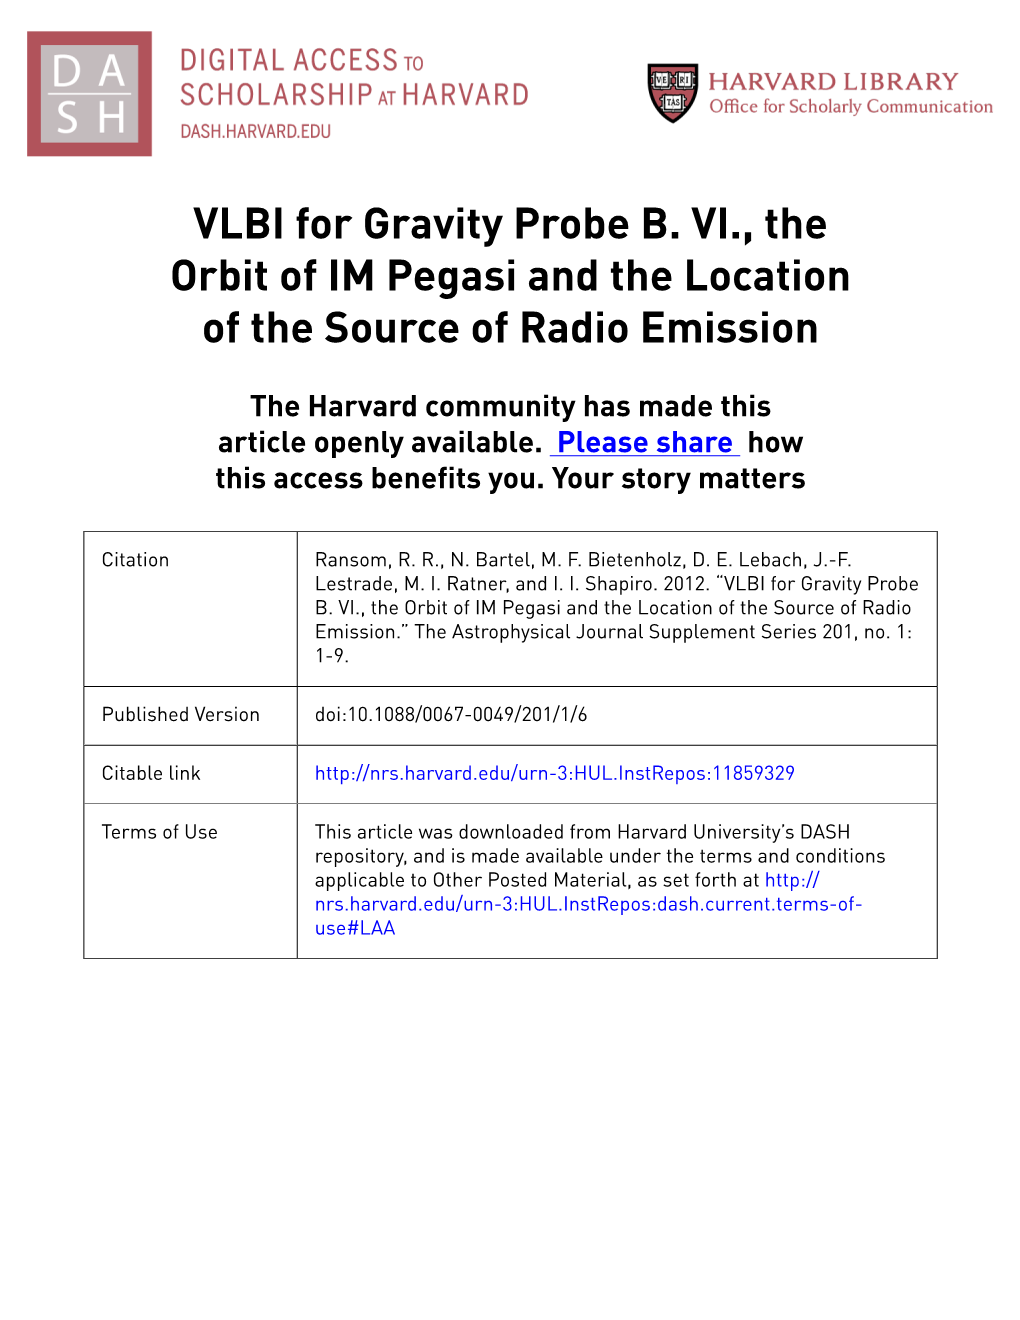 VLBI for Gravity Probe B. VI., the Orbit of IM Pegasi and the Location of the Source of Radio Emission